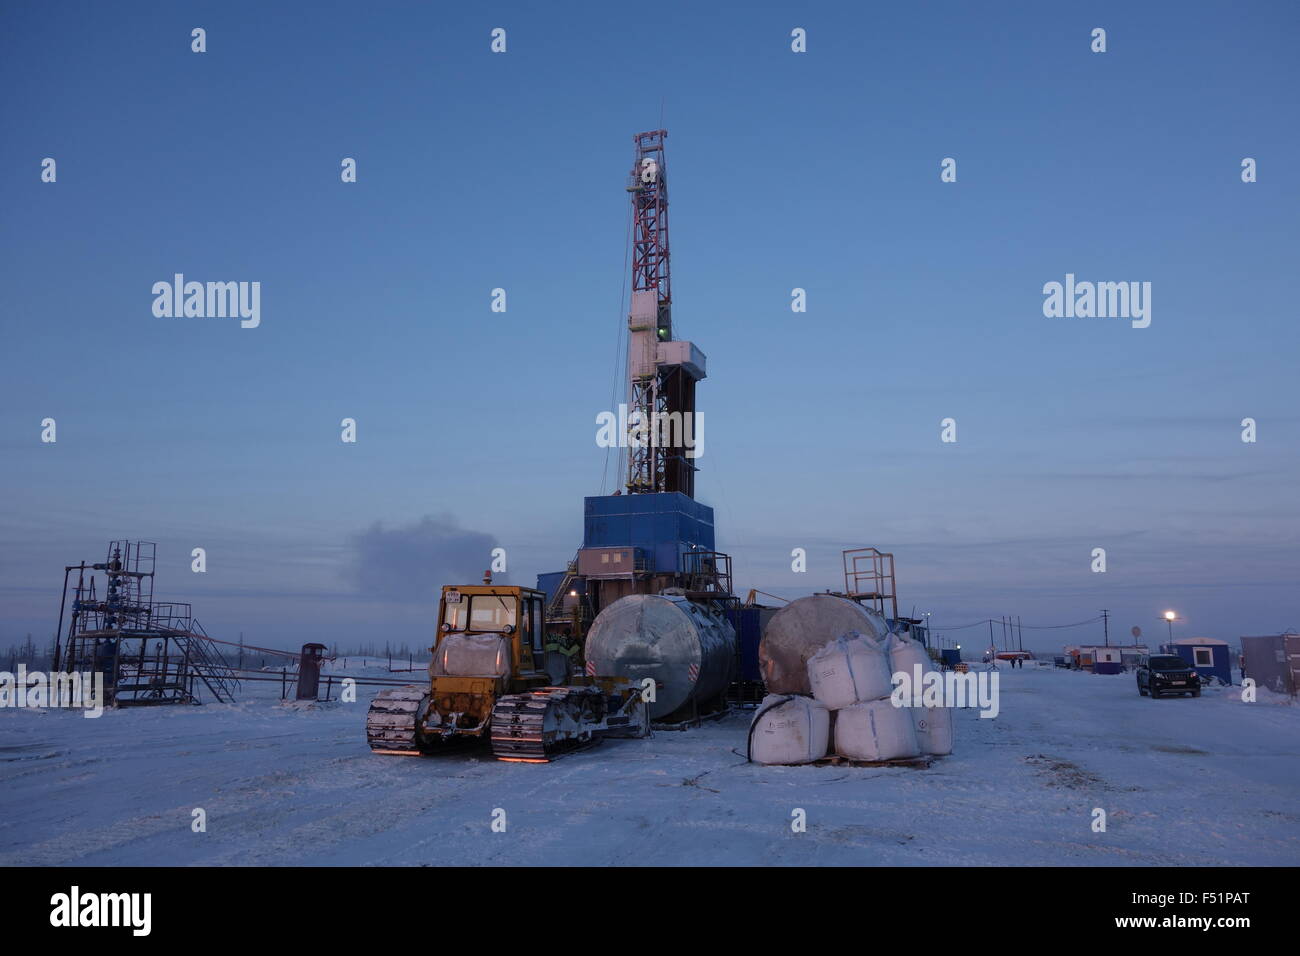 Drilling rig 27 at the Urengoy gas field near the city of Novy Urengoy, Russia, 03 December 2014. The Russian-German company Achimgaz extracts gas from depths of 4,000 metres for the European market. Photo: ULF MAUDER/dpa Stock Photo